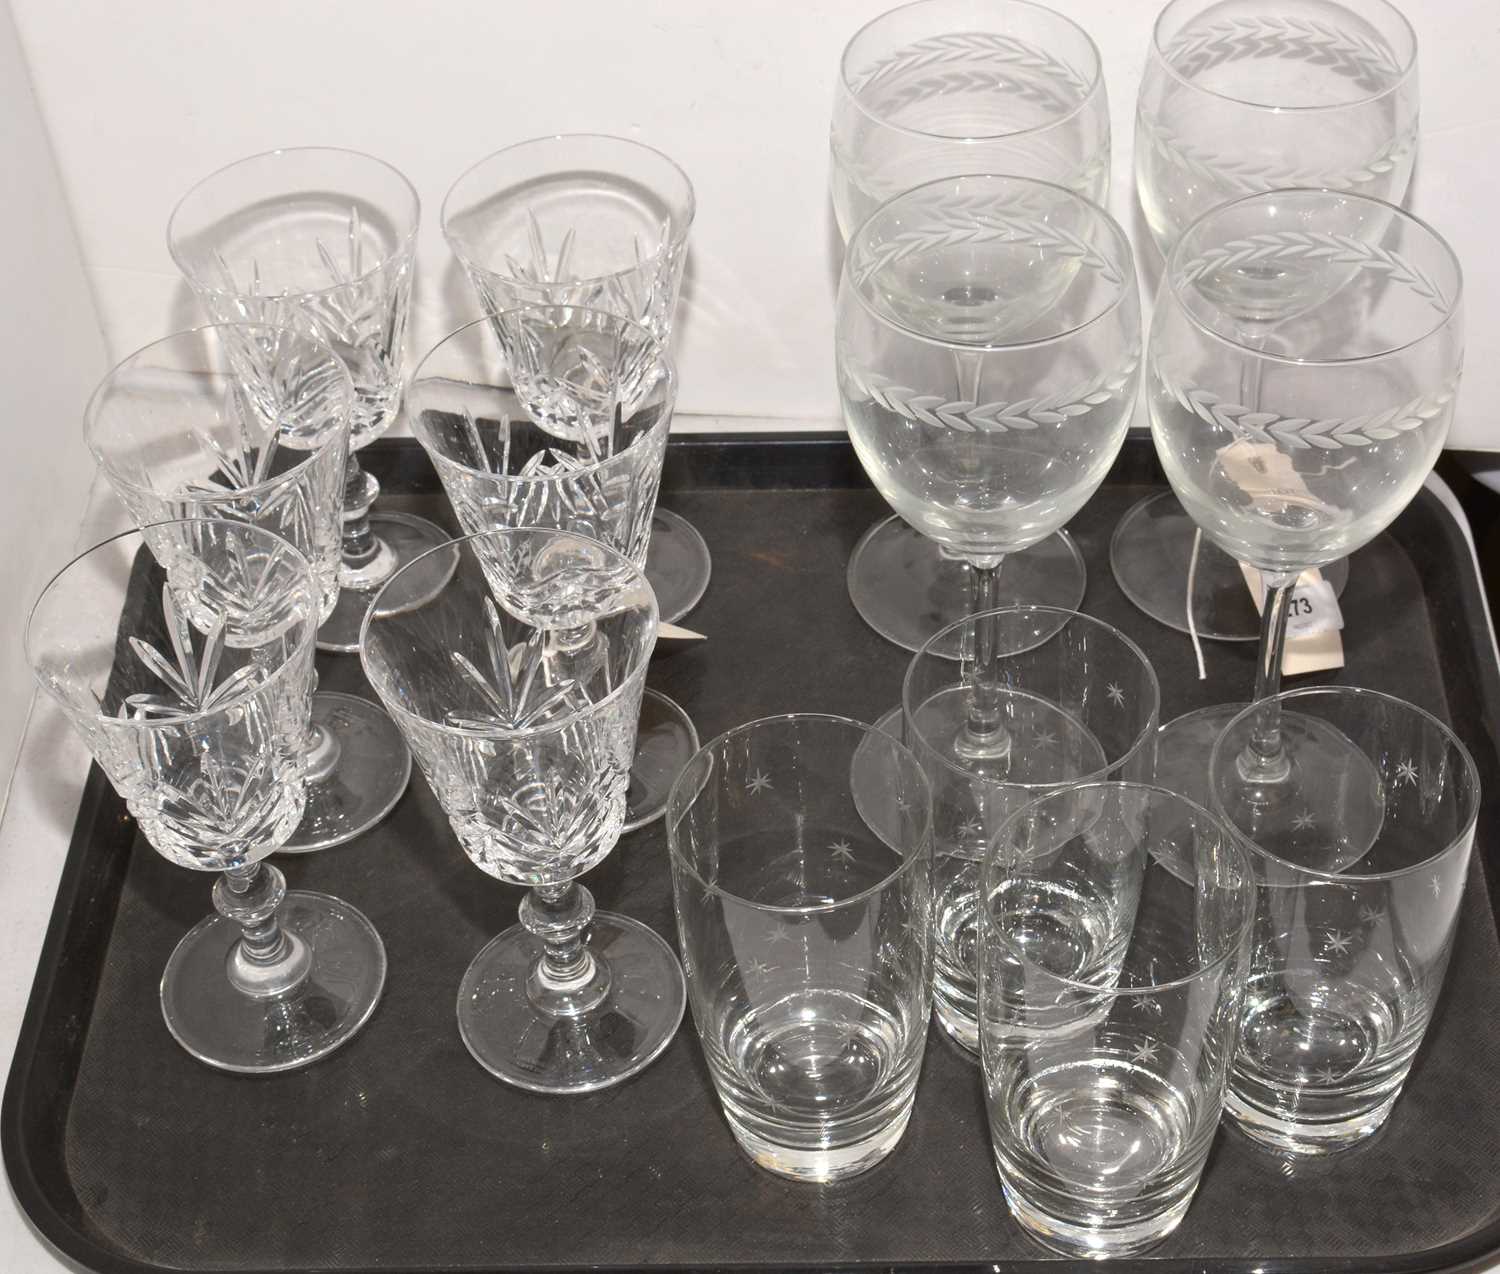 Three sets of glasses, various.